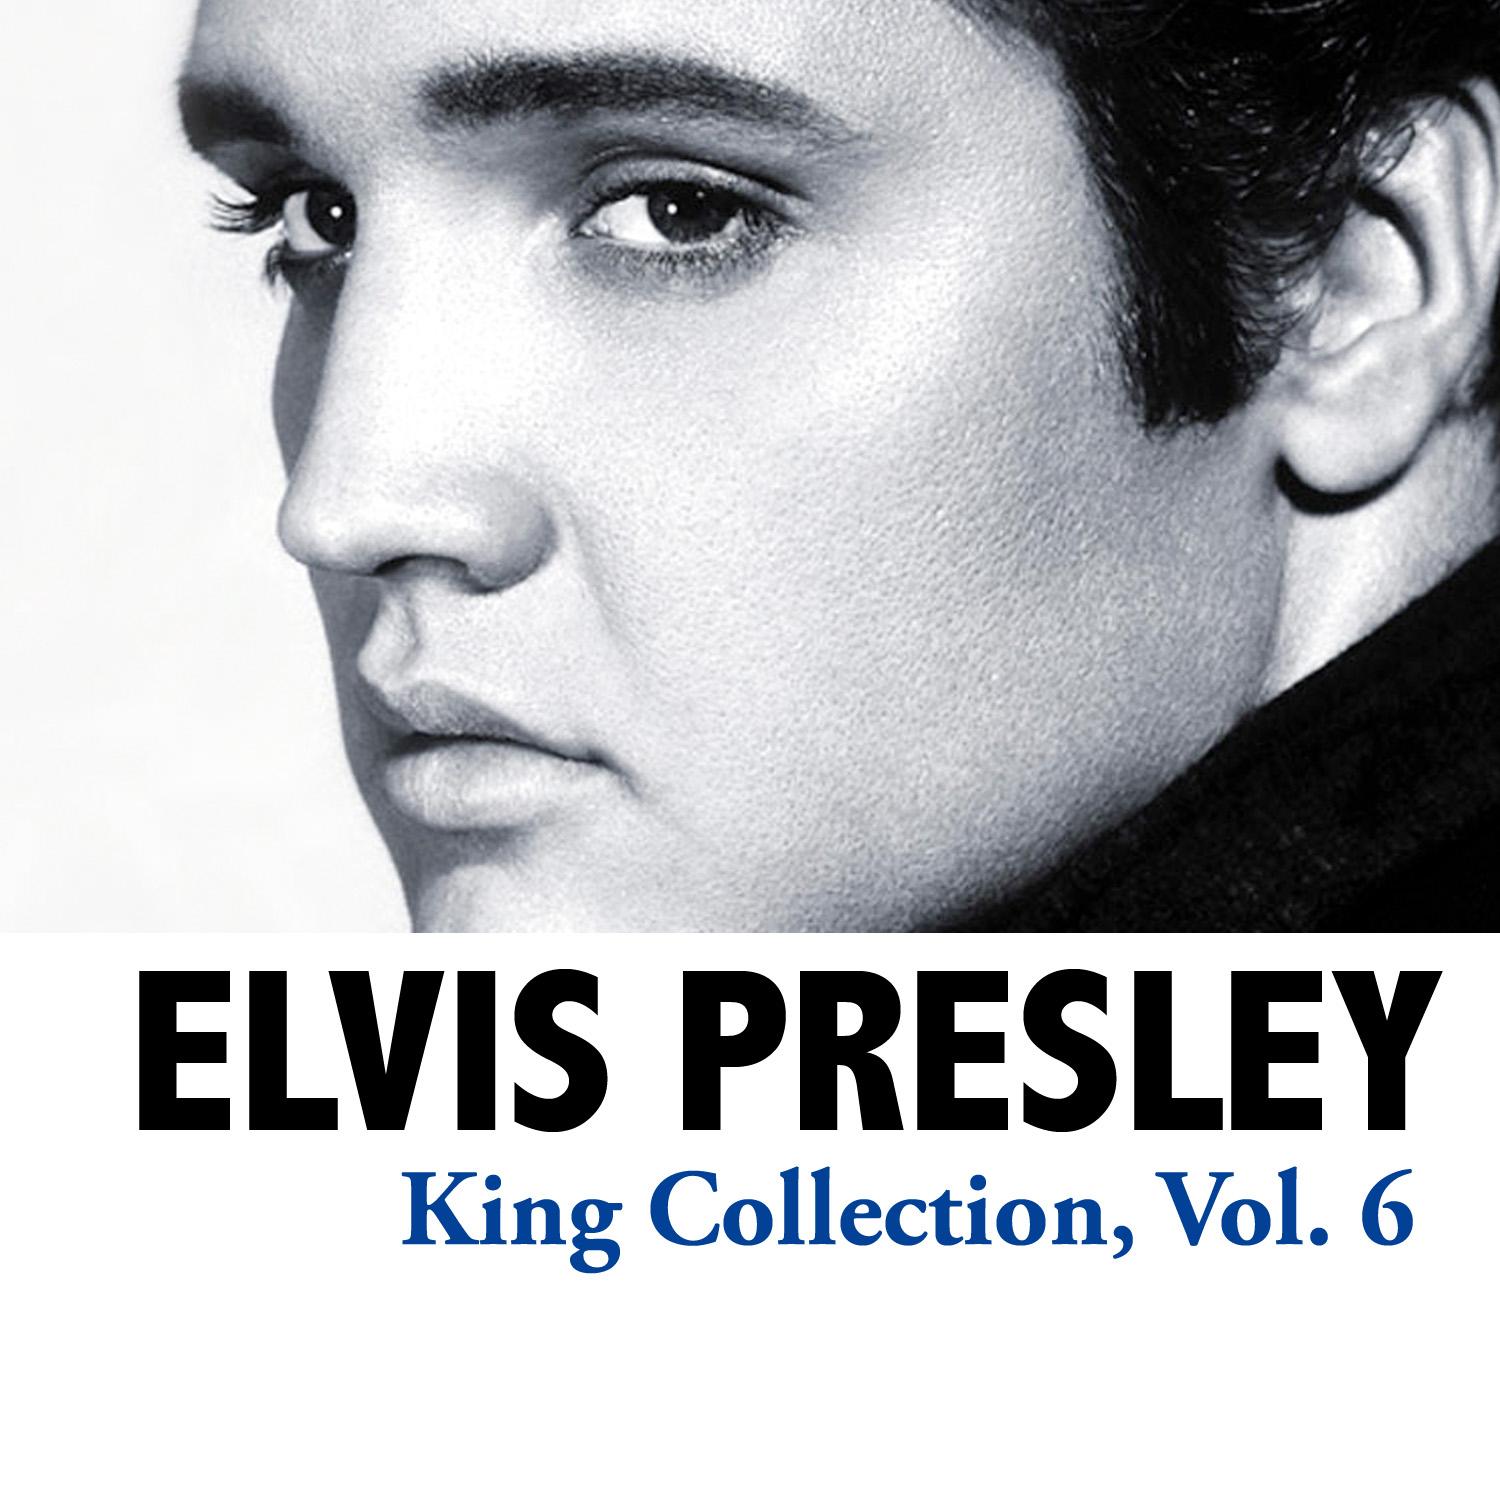 King Collection, Vol. 6